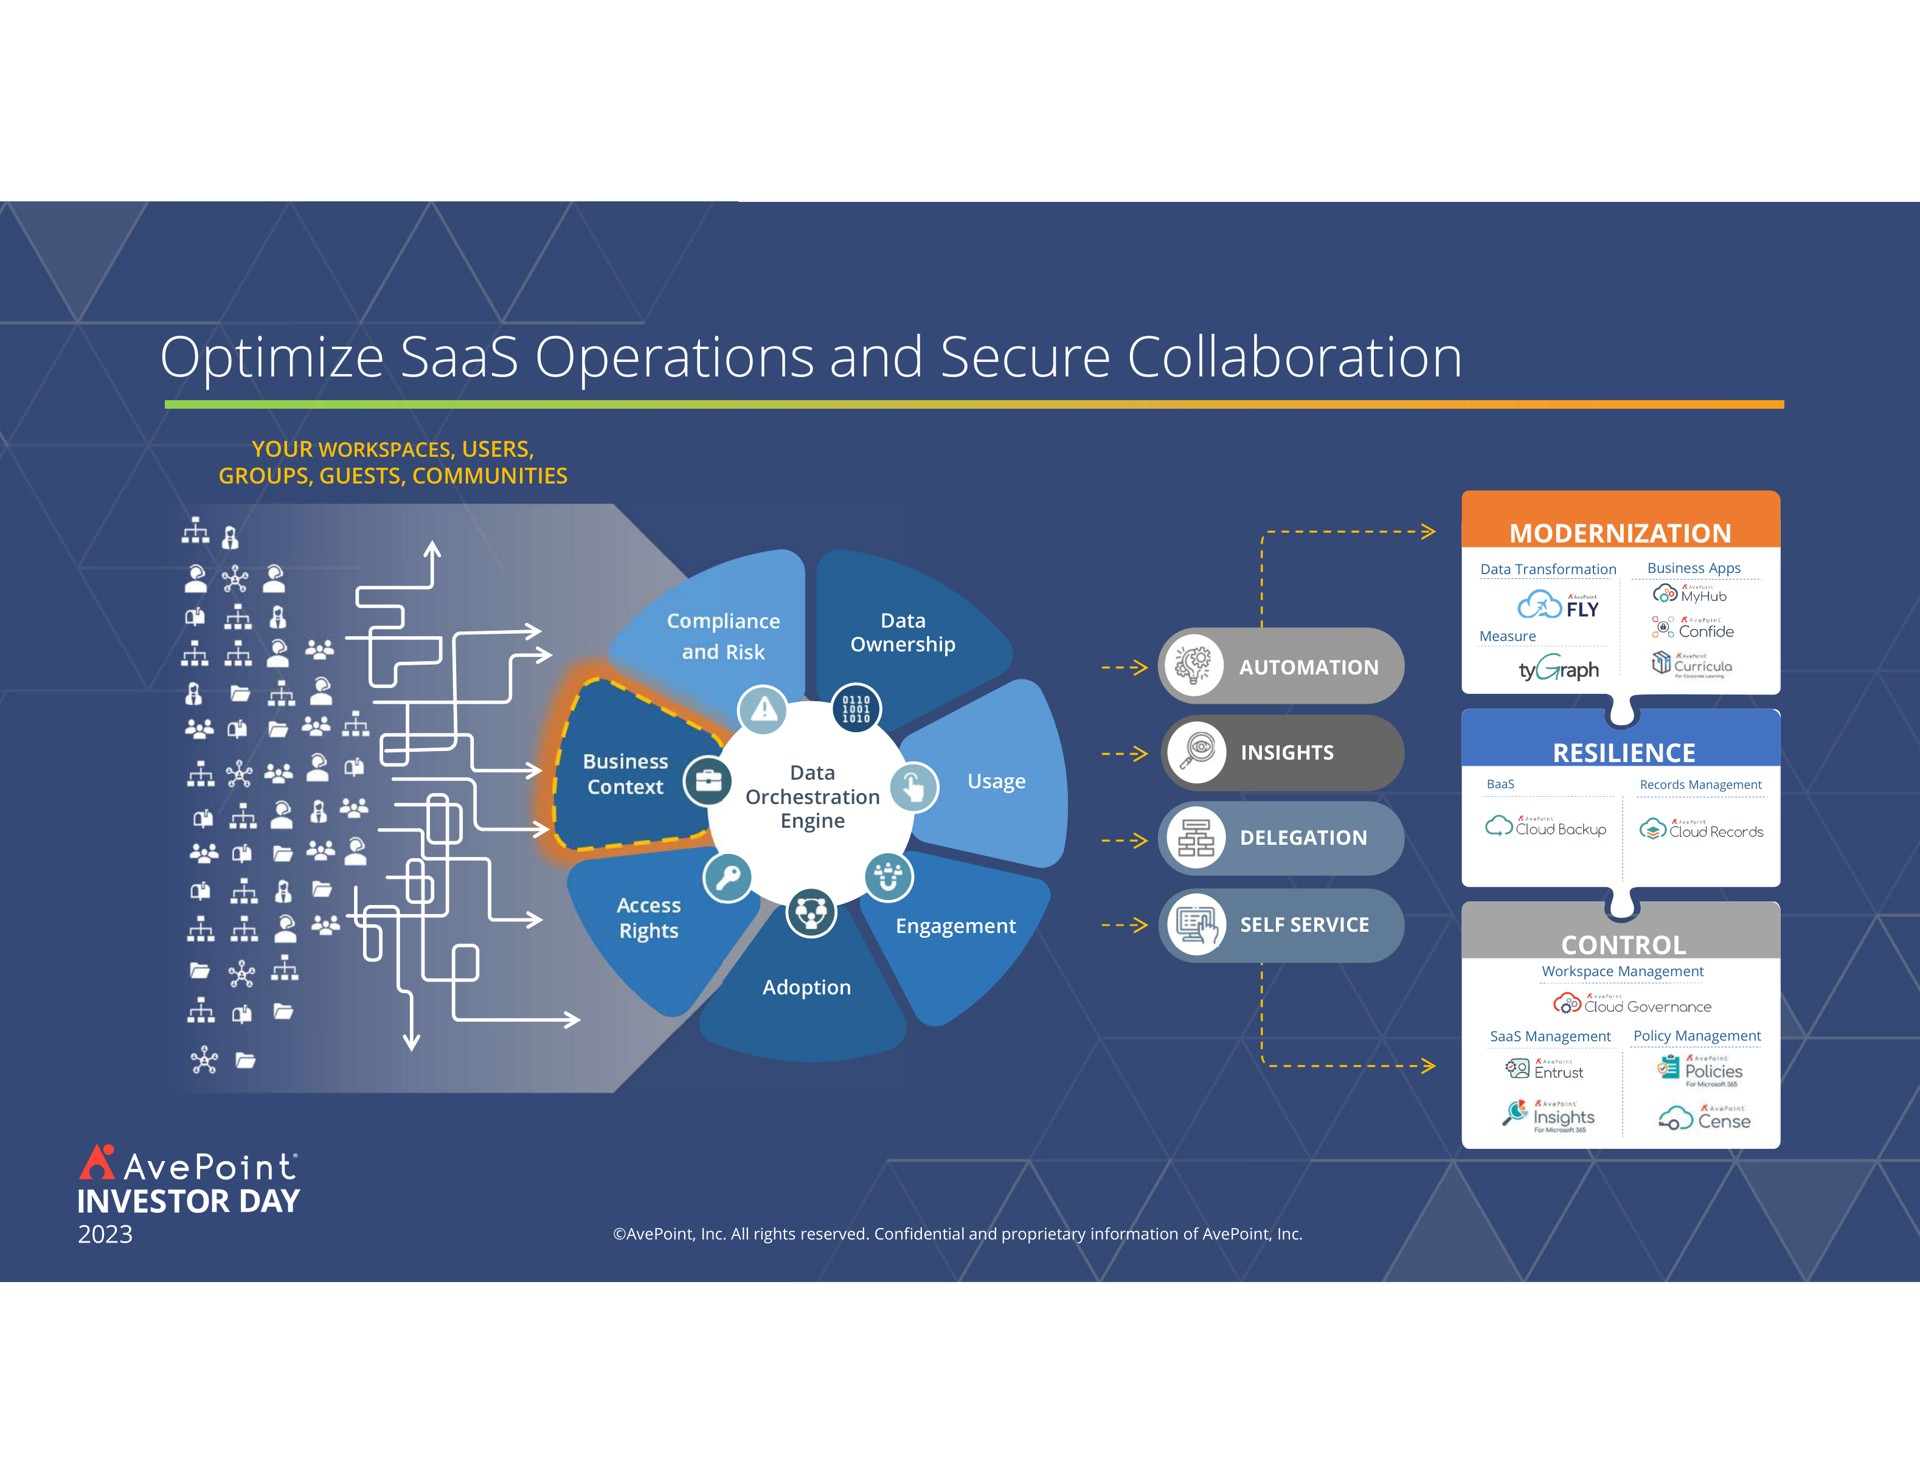 optimize operations and secure collaboration investor day control | AvePoint